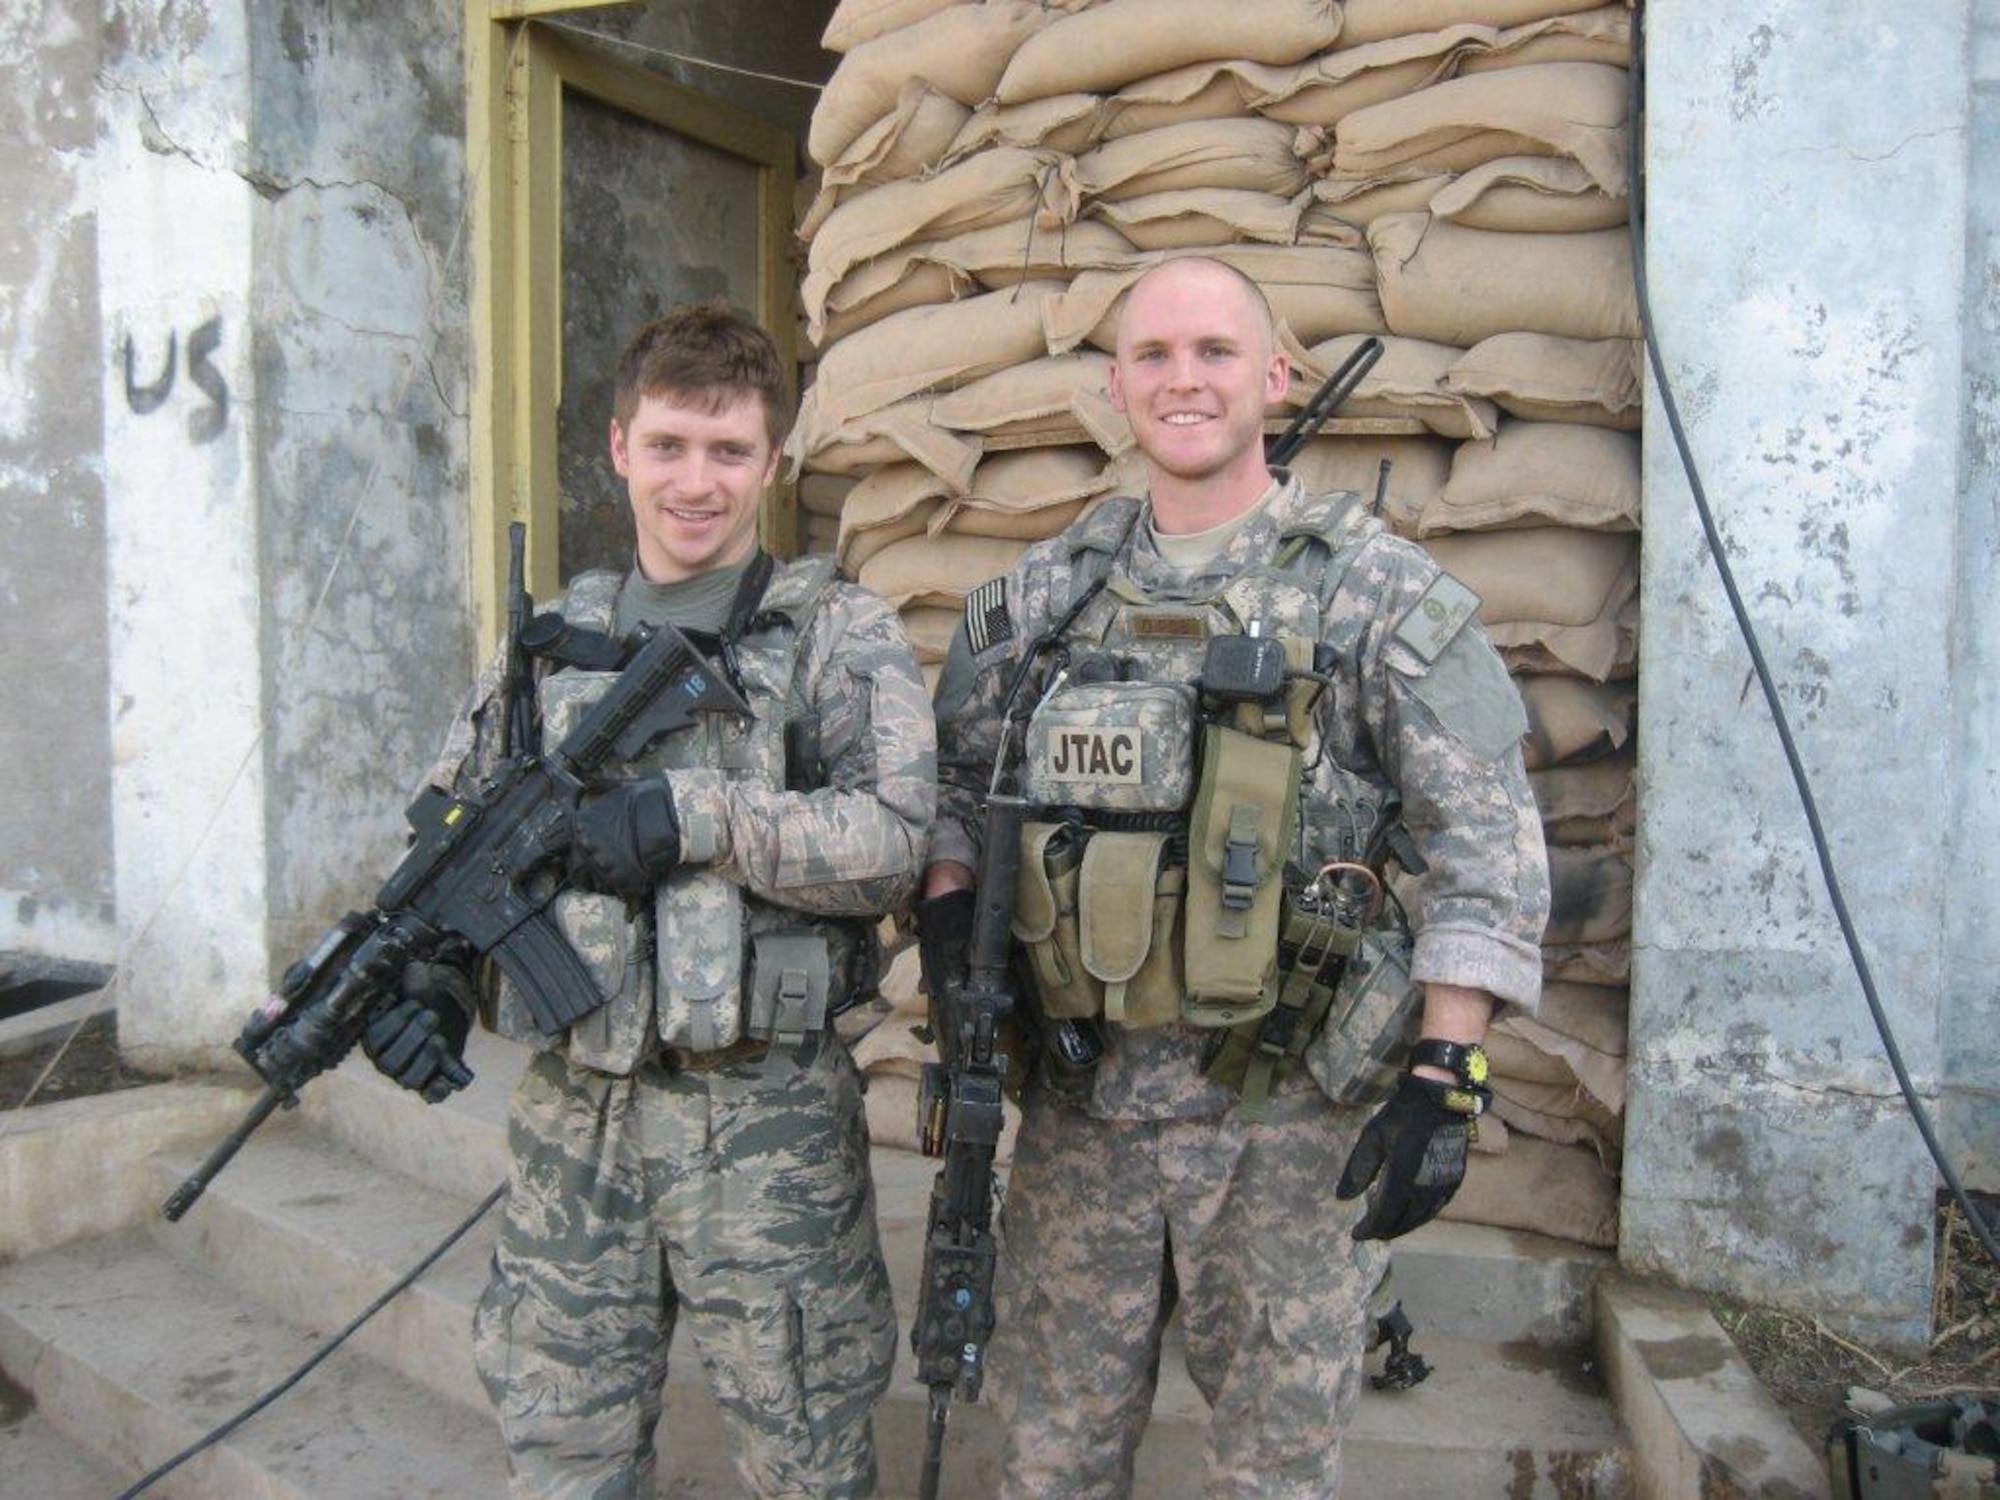 Senior Airmen Michael Malarsie and Bradley Smith, a two-man Joint Terminal Attack Controller (JTAC) who deployed together to Afghanistan in December 2009. (Courtesy  photo) 
